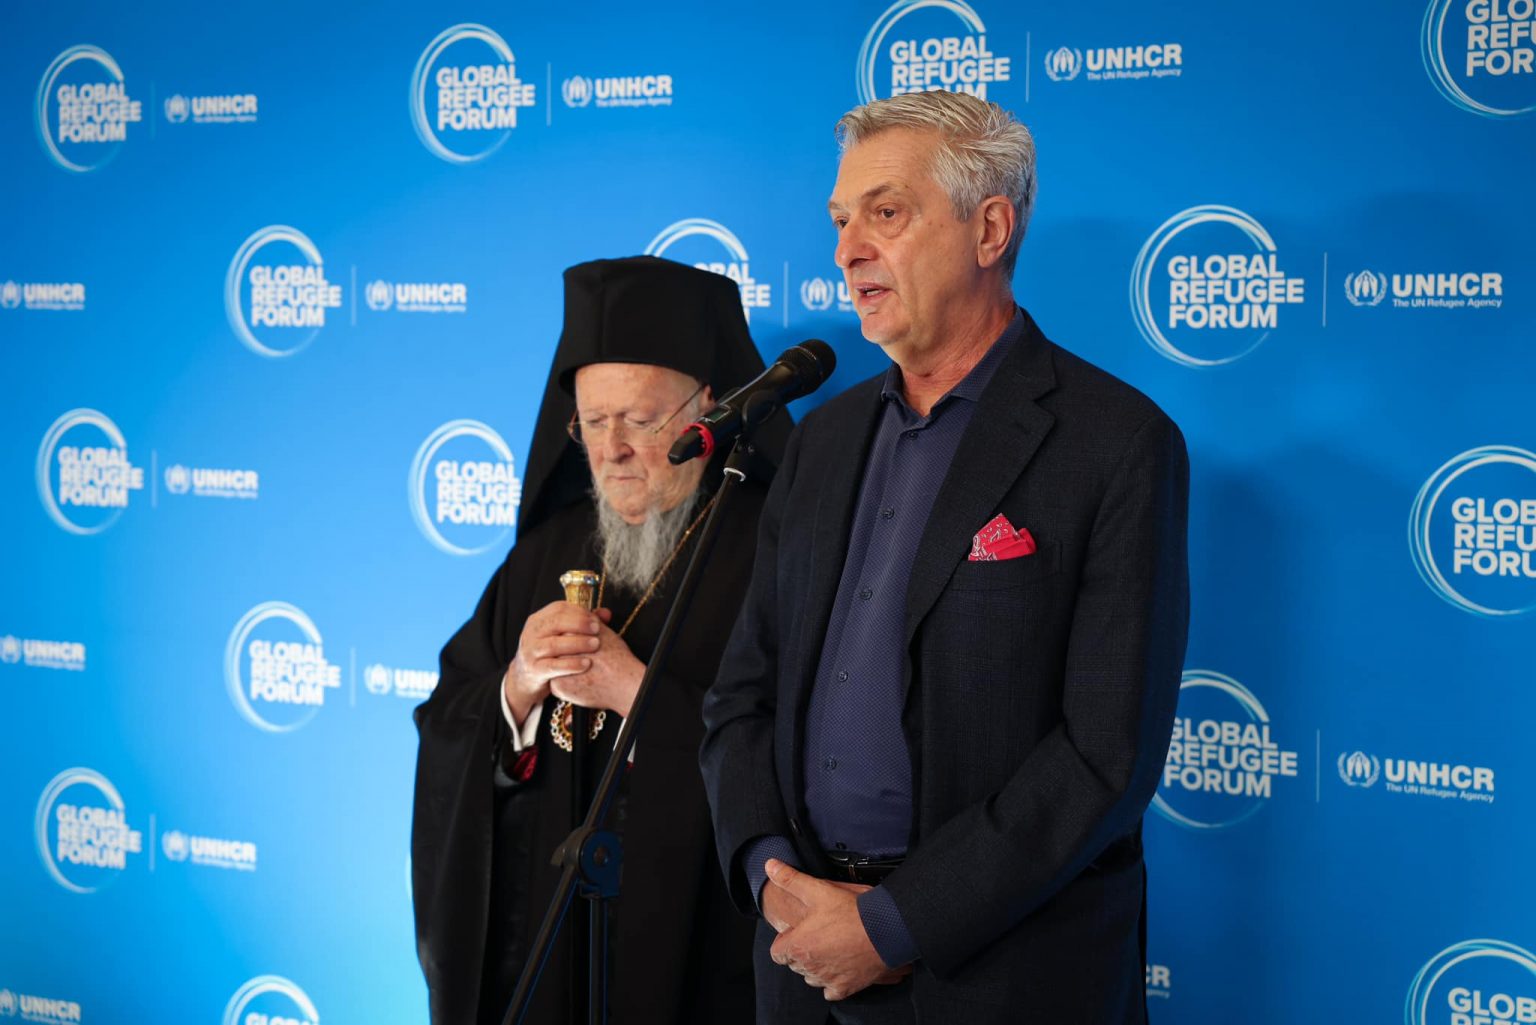 Ecumenical Patriarch Bartholomew at the Global Refugee Forum of the United Nations